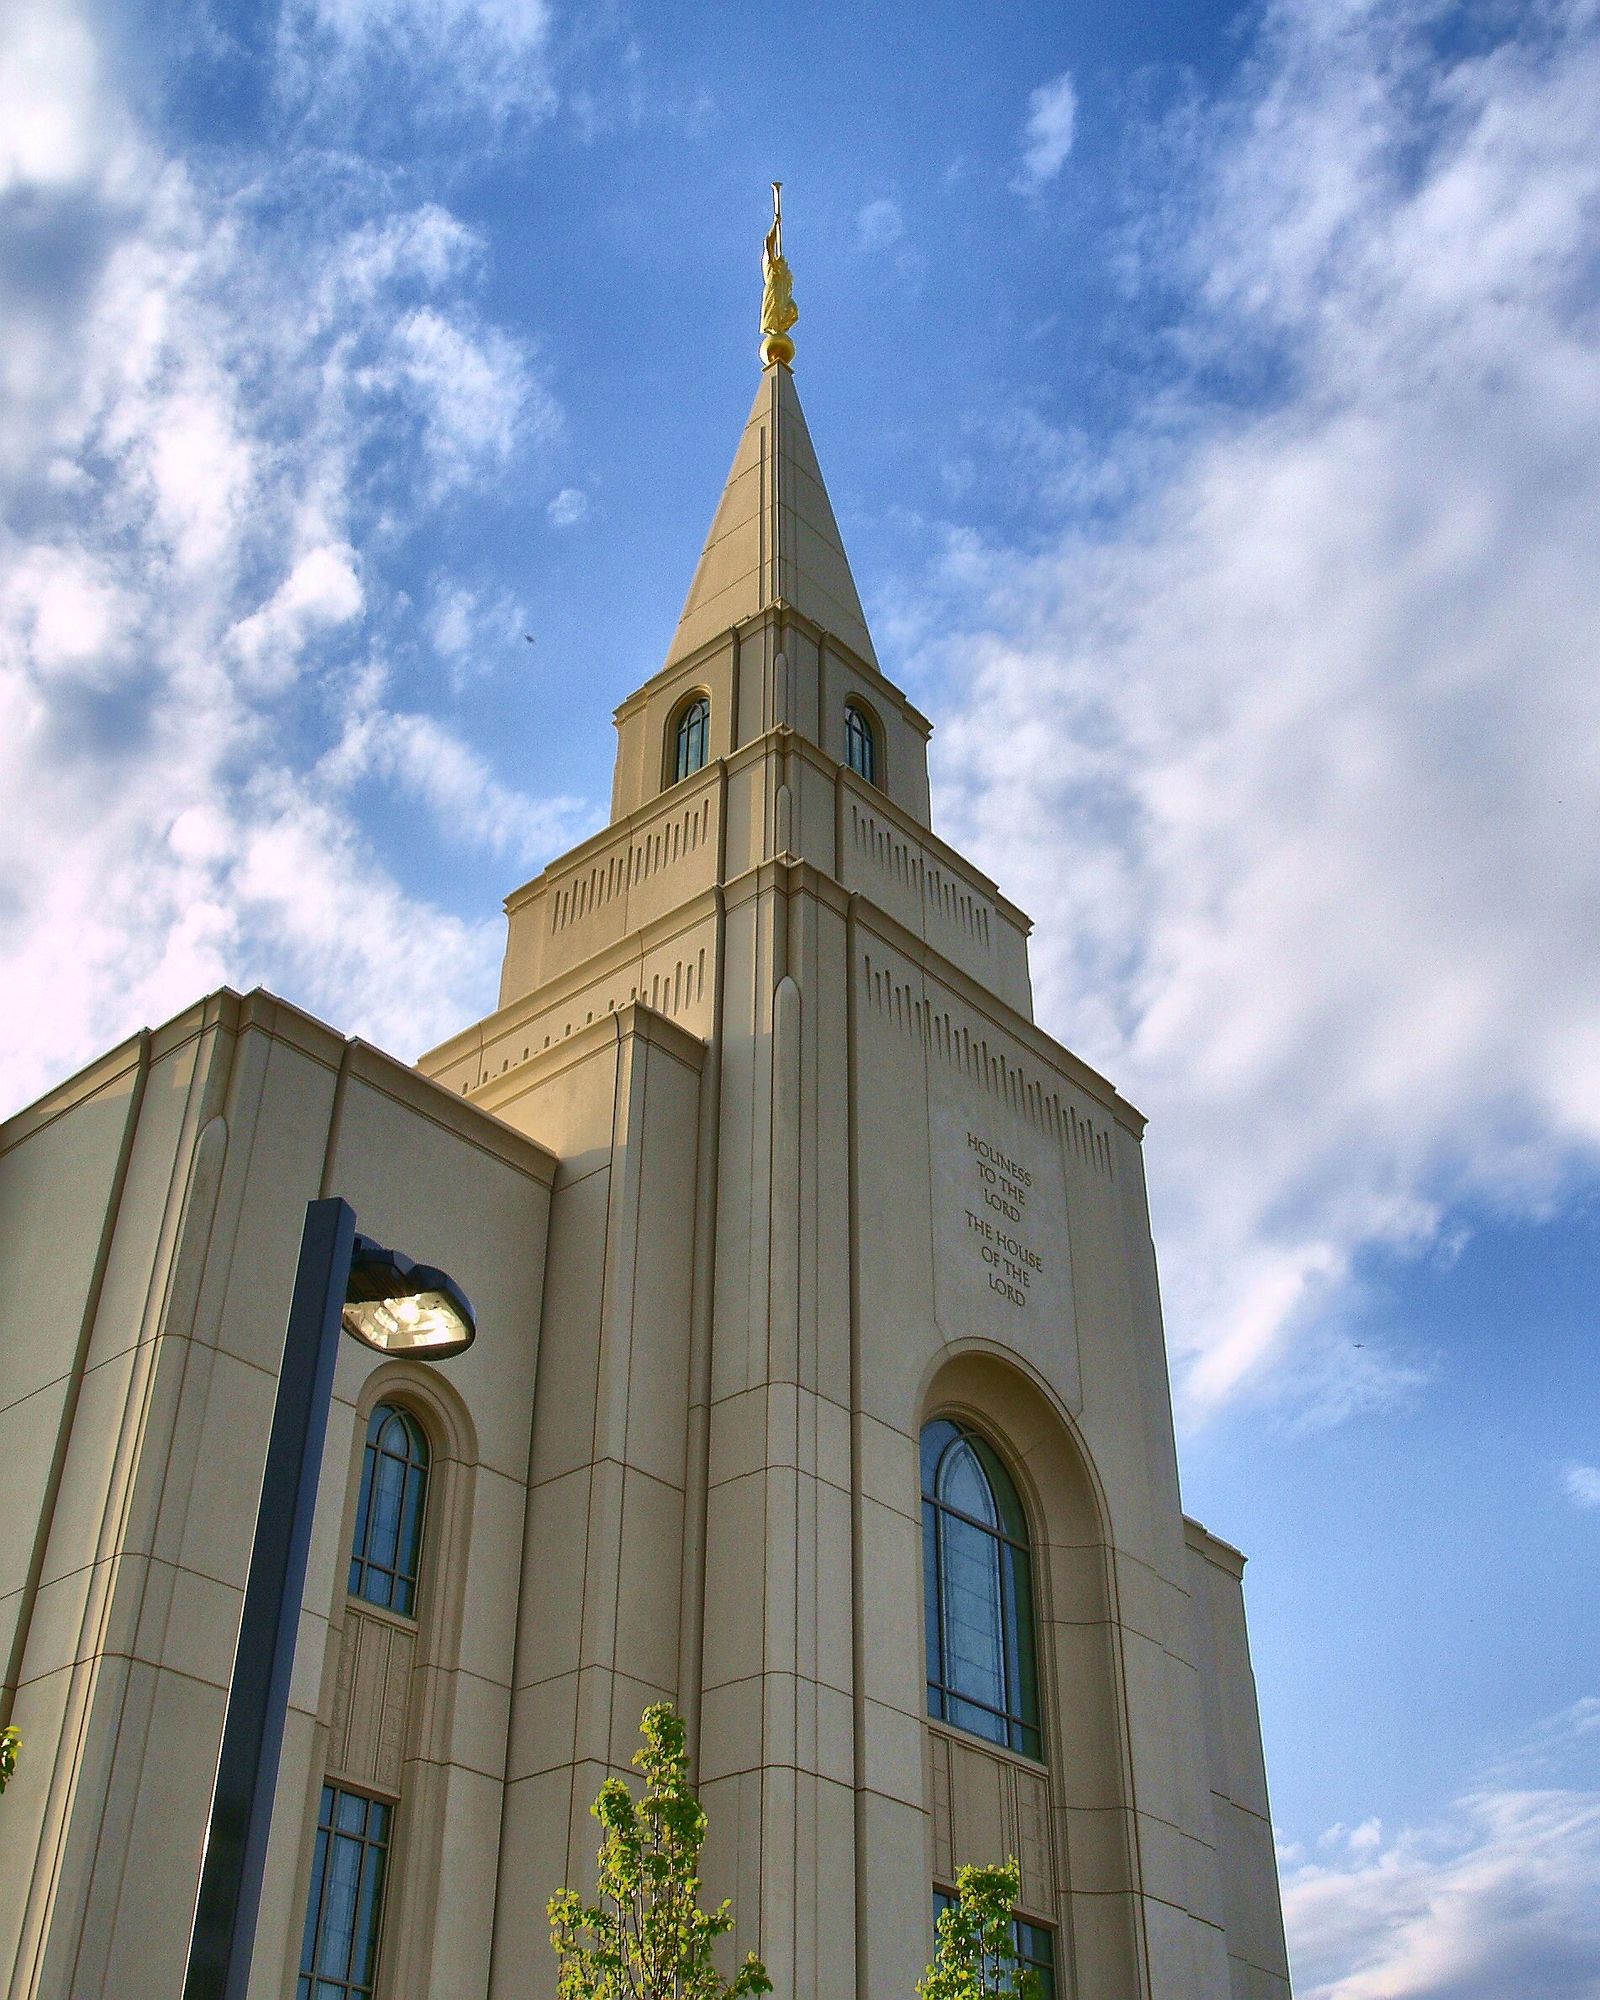 The Kansas City Missouri Temple spire, including the exterior of the temple.